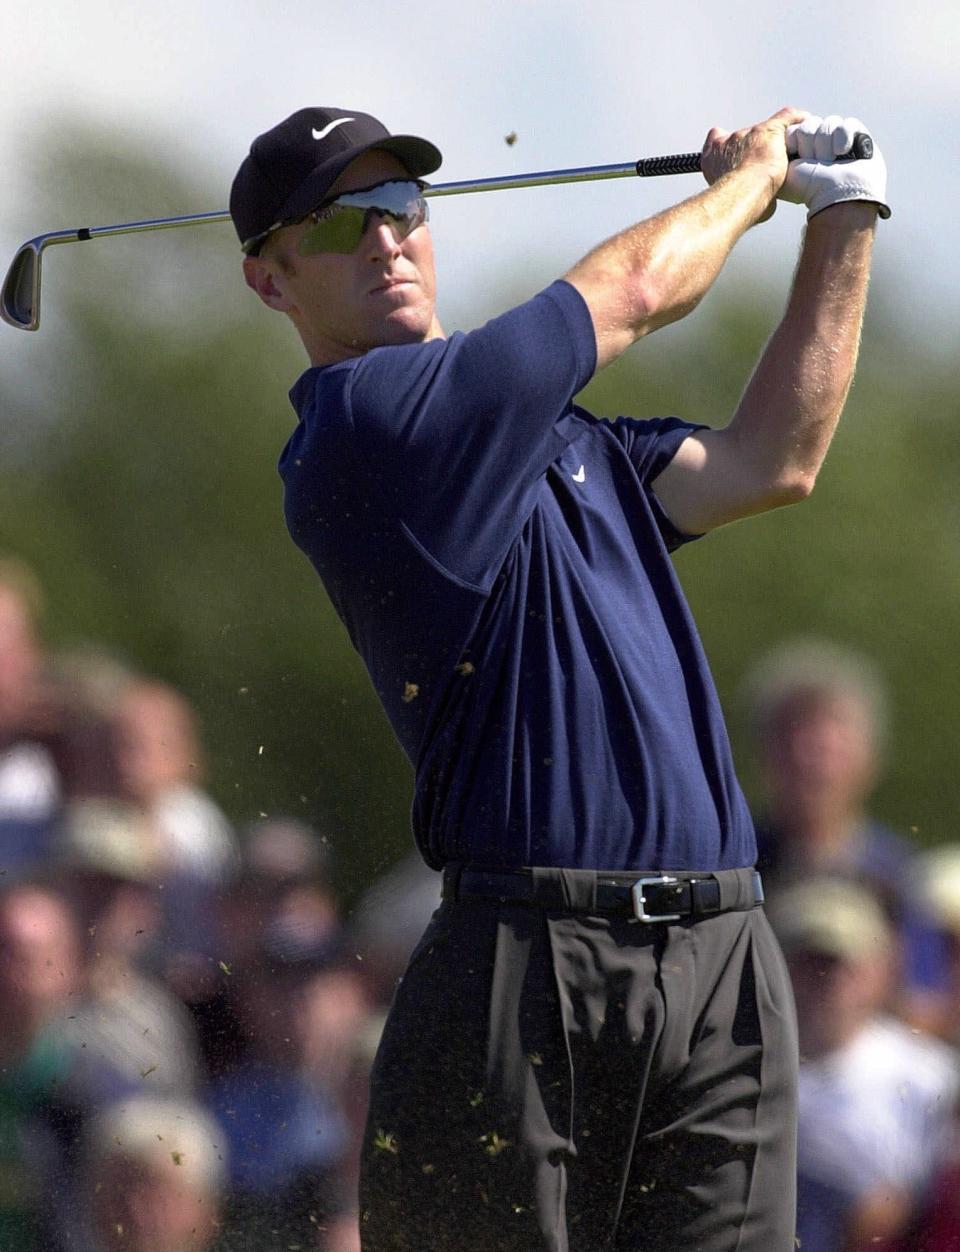 Jacksonville native David Duval won his only major championship at the 2001 British Open at Royal Lytham and St. Annes.